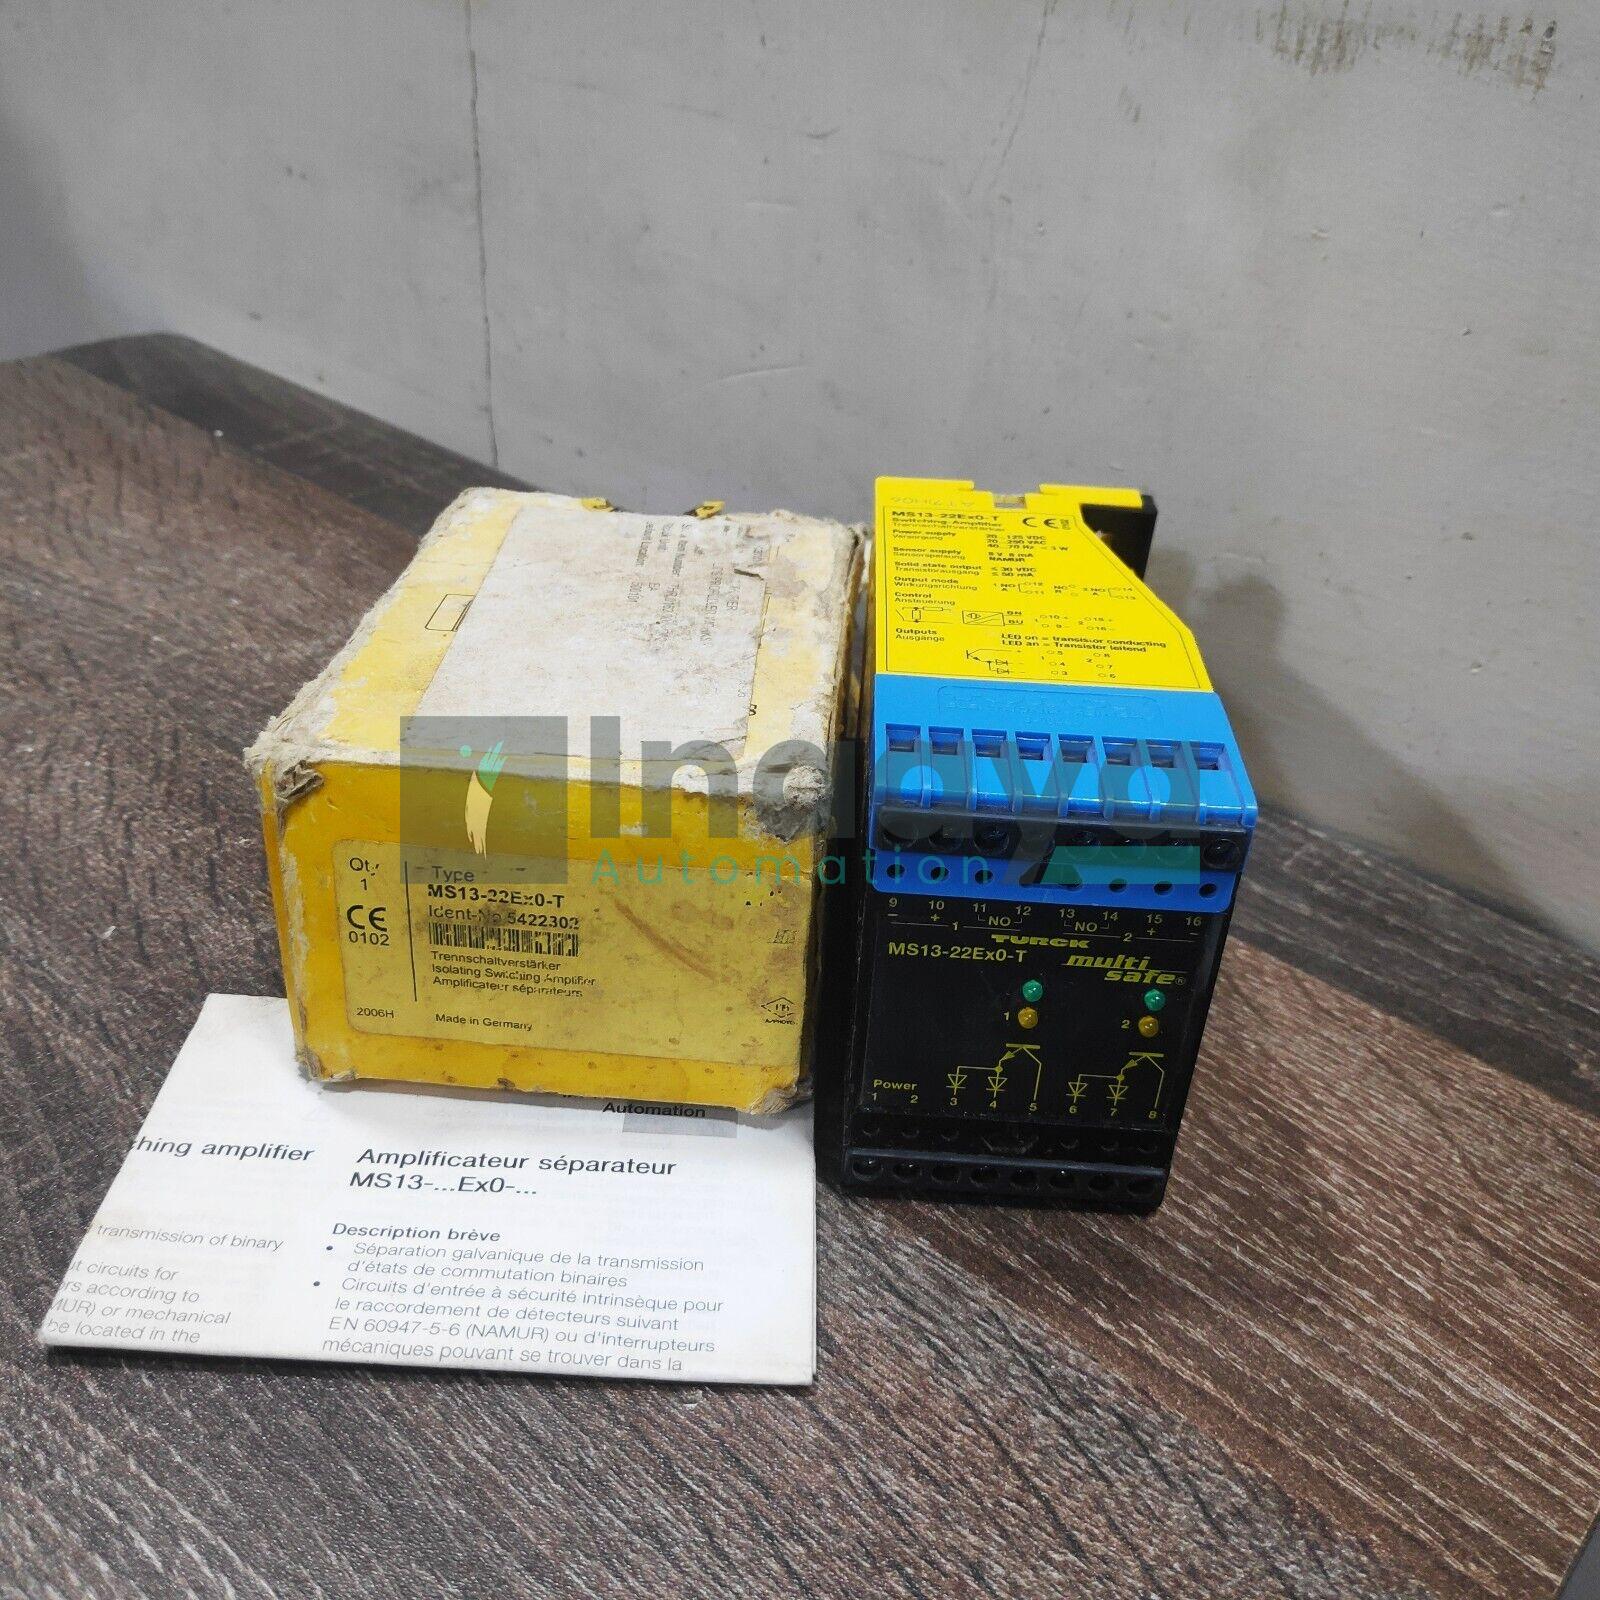 TURCK MS13-22EX0-T AMPLIFIER RELAY 90-132VAC 10-30VDC DIN 19234 8V 8MA MULTISAFE MULTIMODUL MULTICART AND MATING ACCESSORIES